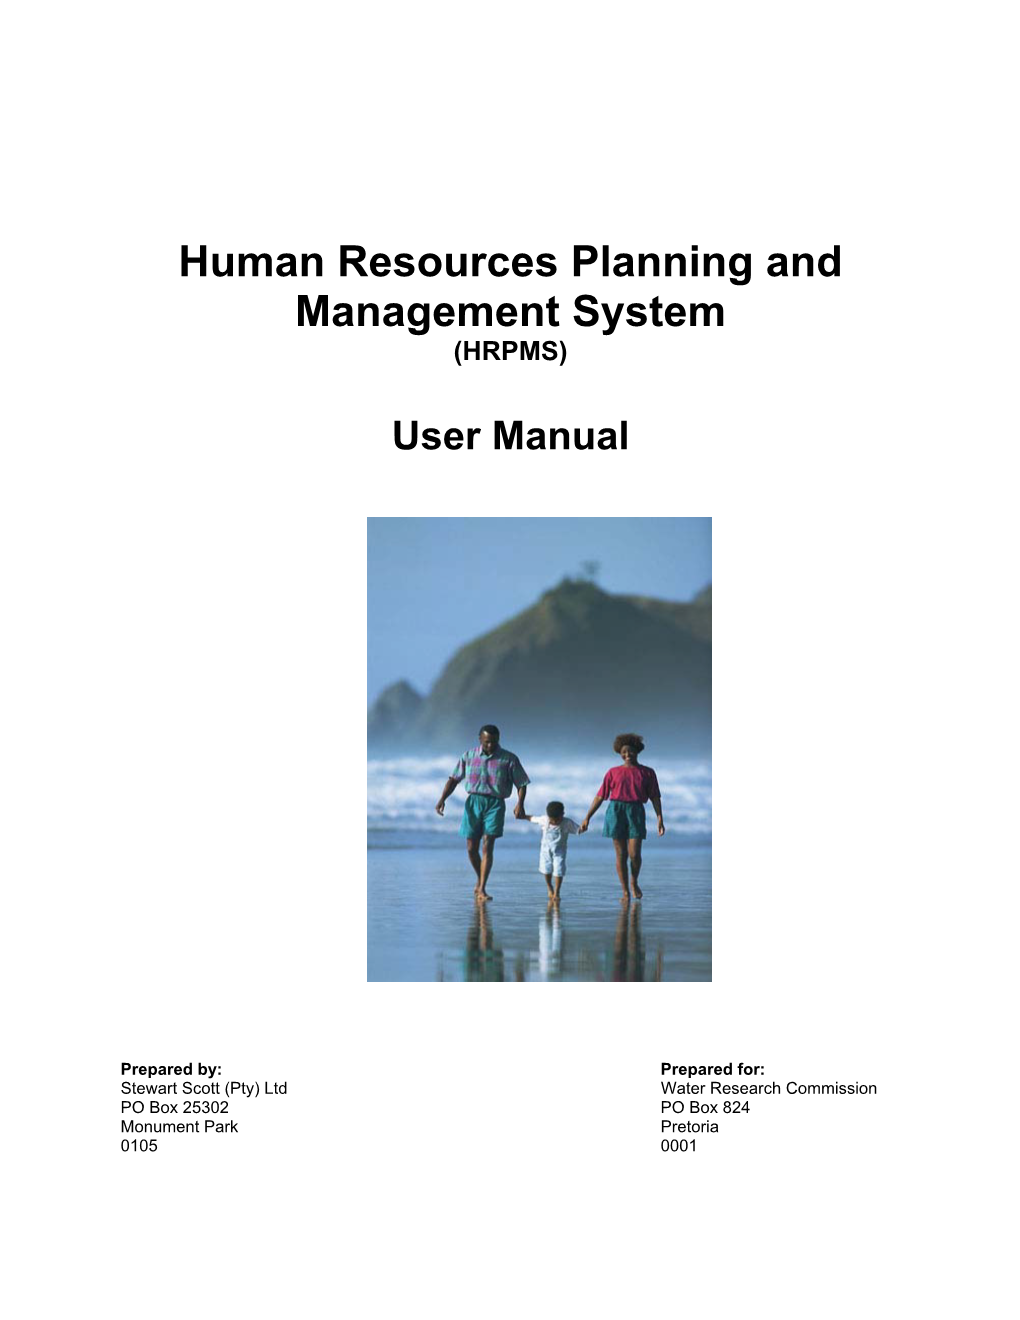 Human Resources Planning and Management System (HRPMS)